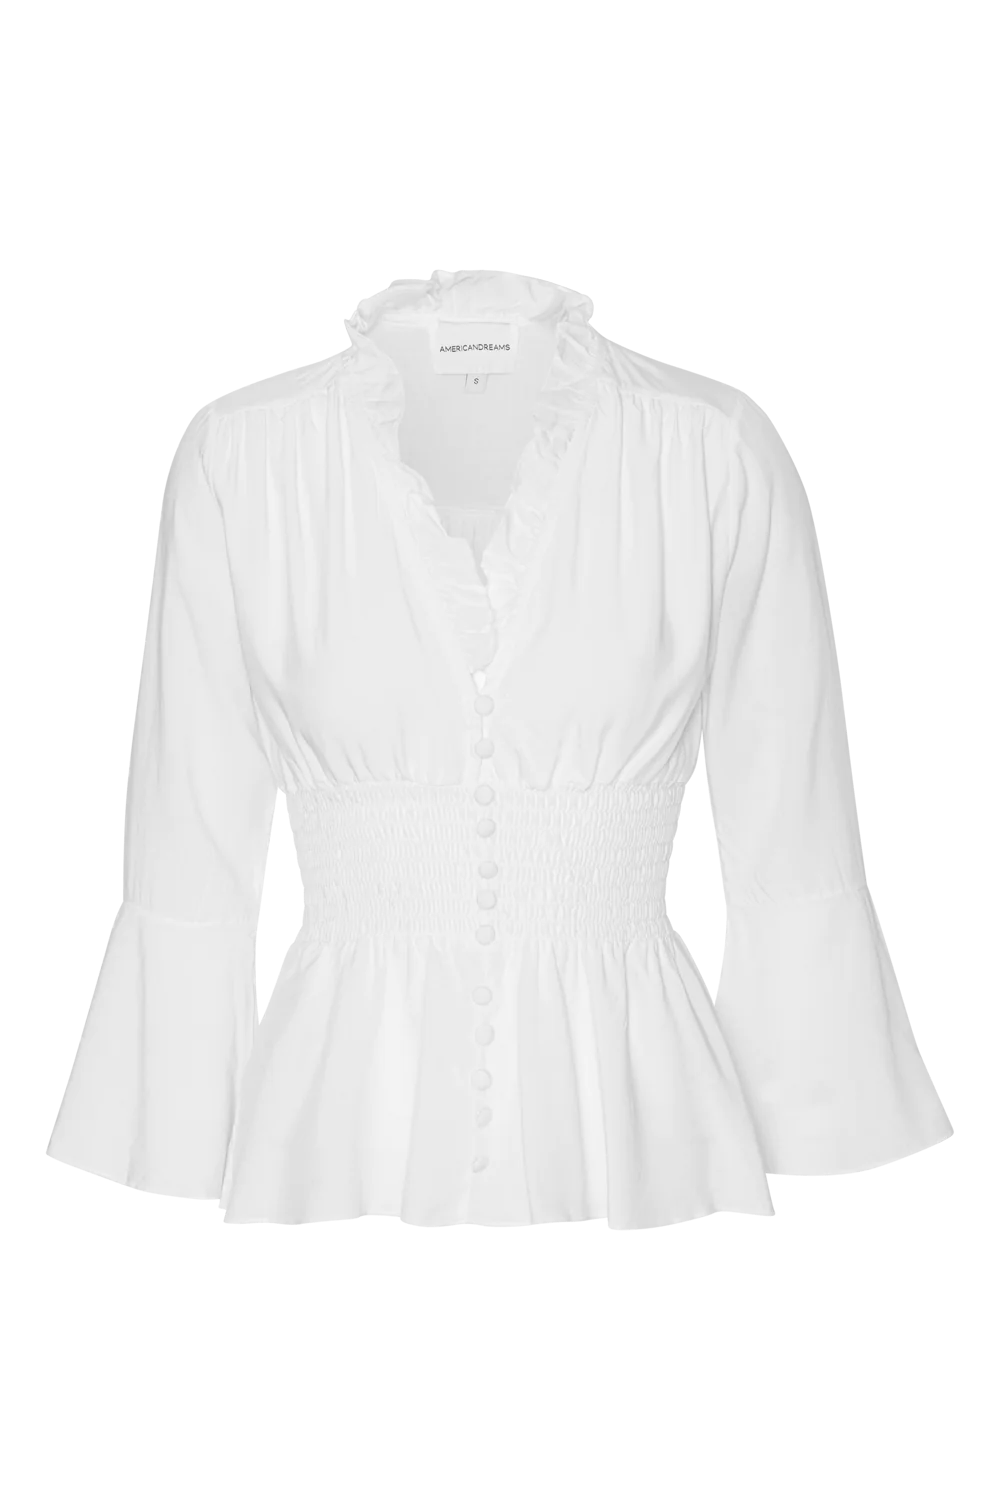 AmericanDreams Sally Top in White